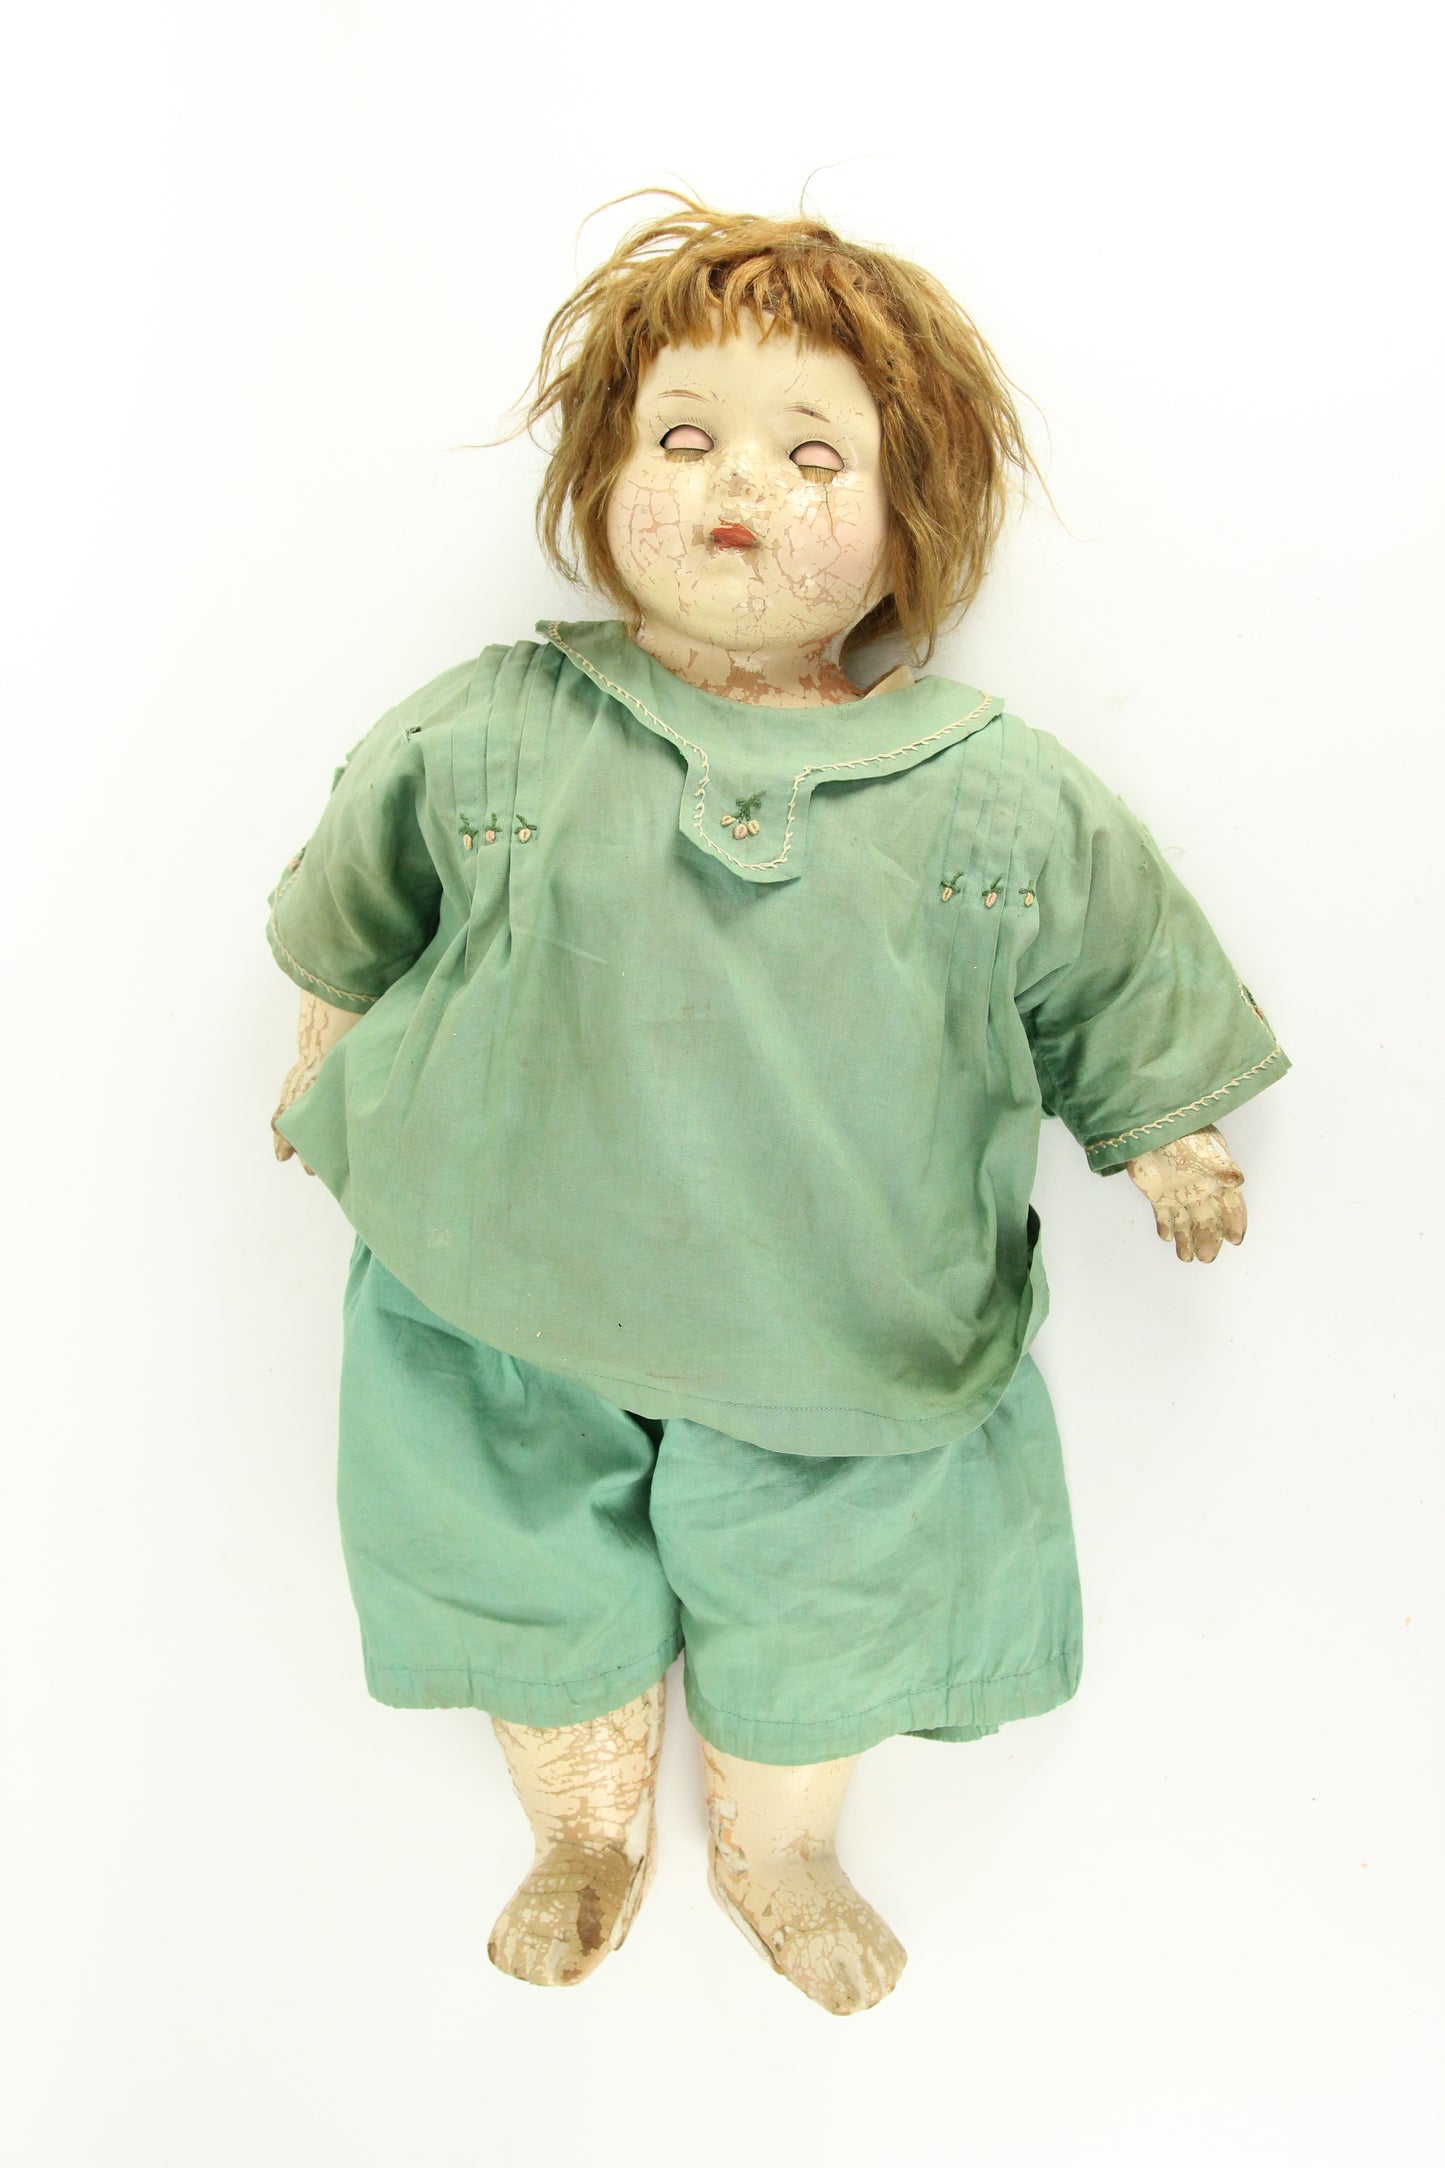 Antique Acme Toy Co. Composition Baby Doll with Green Clothes, 24"